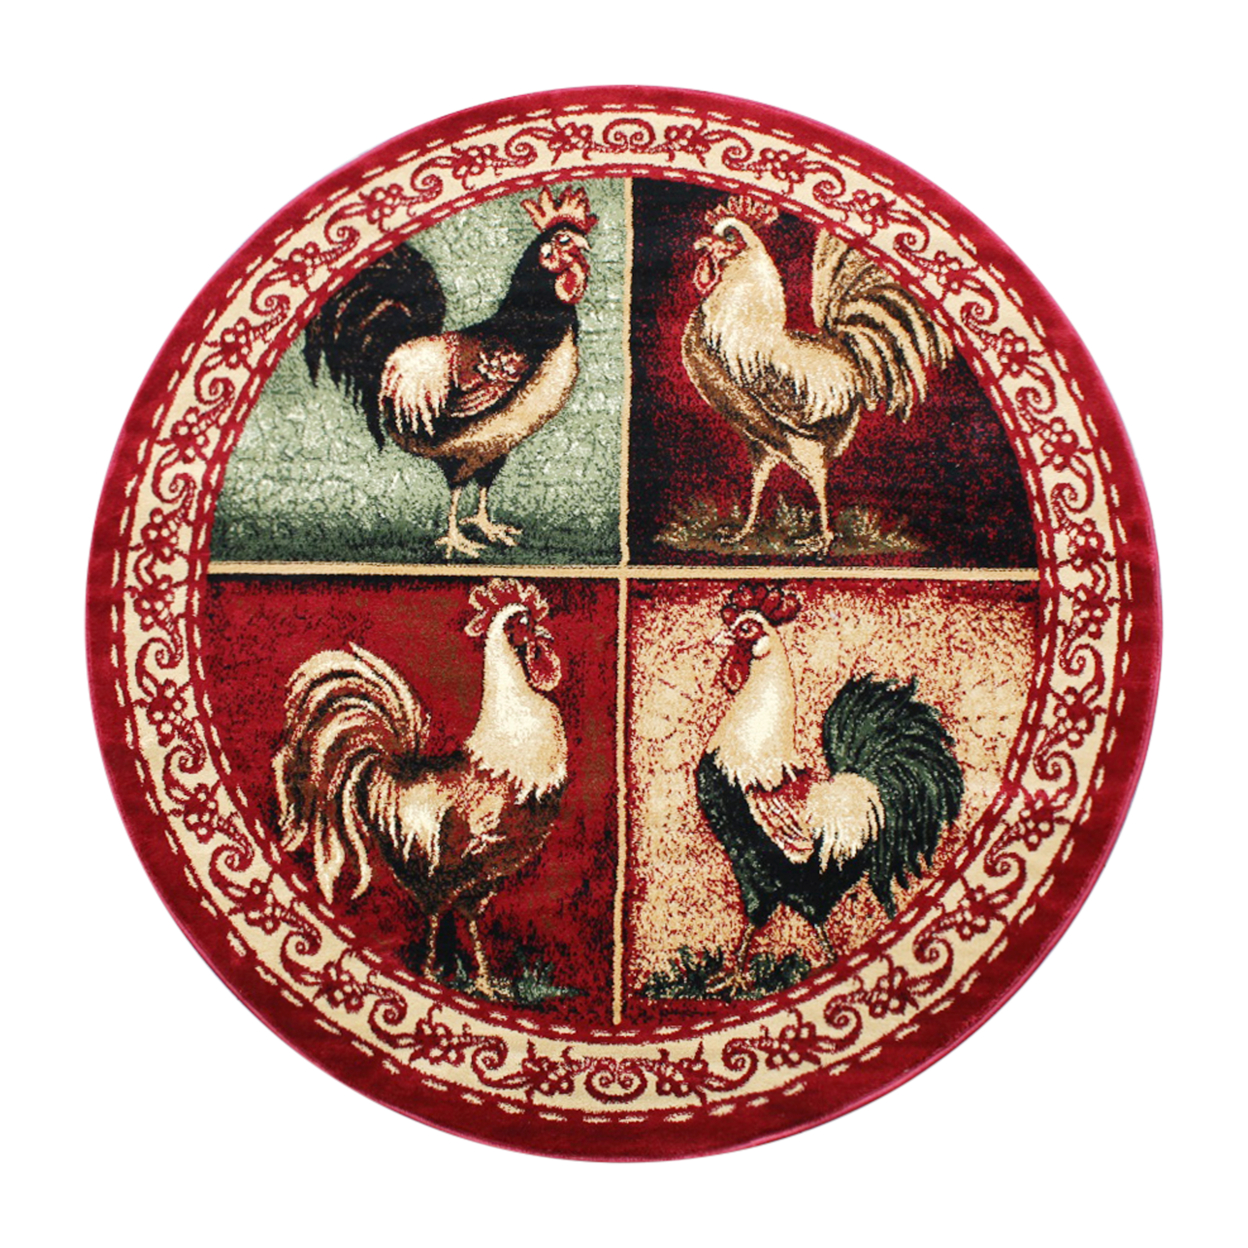 Gallus Collection 6' X 6' Round Red Rooster Themed Olefin Area Rug With Jute Backing For Kitchen, Living Room, Bedroom